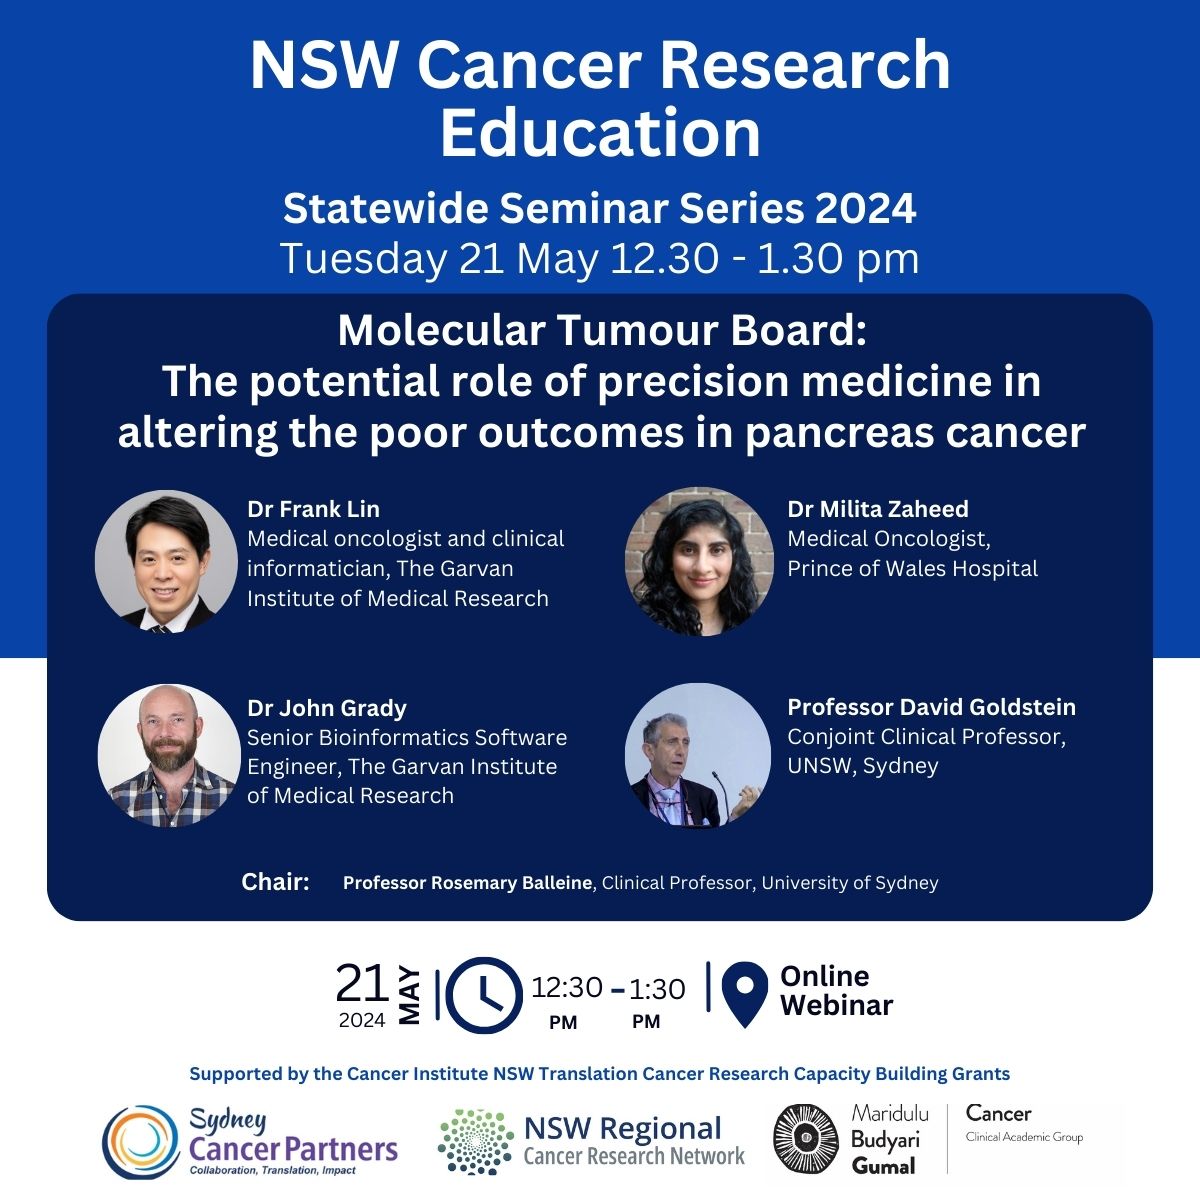 Join @NSWRCRN, @CancerSPHERE & @SydCancerPtnrs on May 21st, 12:30-1:30pm for the NSW Cancer Research seminar series - Exploring the role of precision medicine in altering poor outcomes for pancreas cancer. Don’t miss our stellar speakers! Register now: bit.ly/3xVGNJo